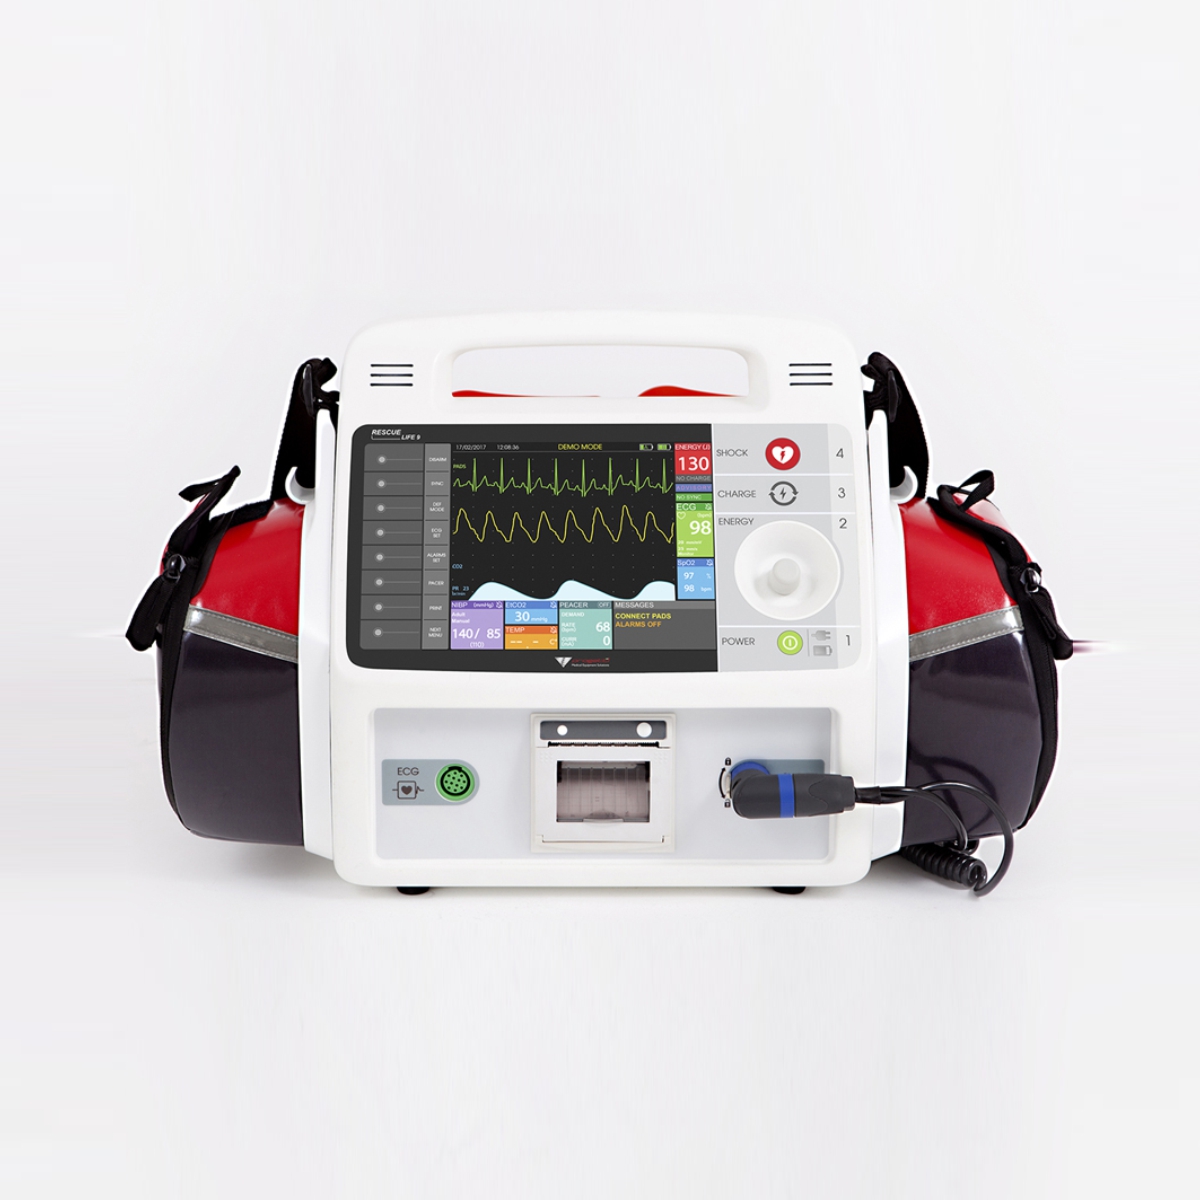 https://halomedicals.com/wp-content/uploads/2022/04/RESCUE-LIFE-9-AED-DEFIBRILLATOR-with-Temp-Spo2-Pacemaker2.jpg